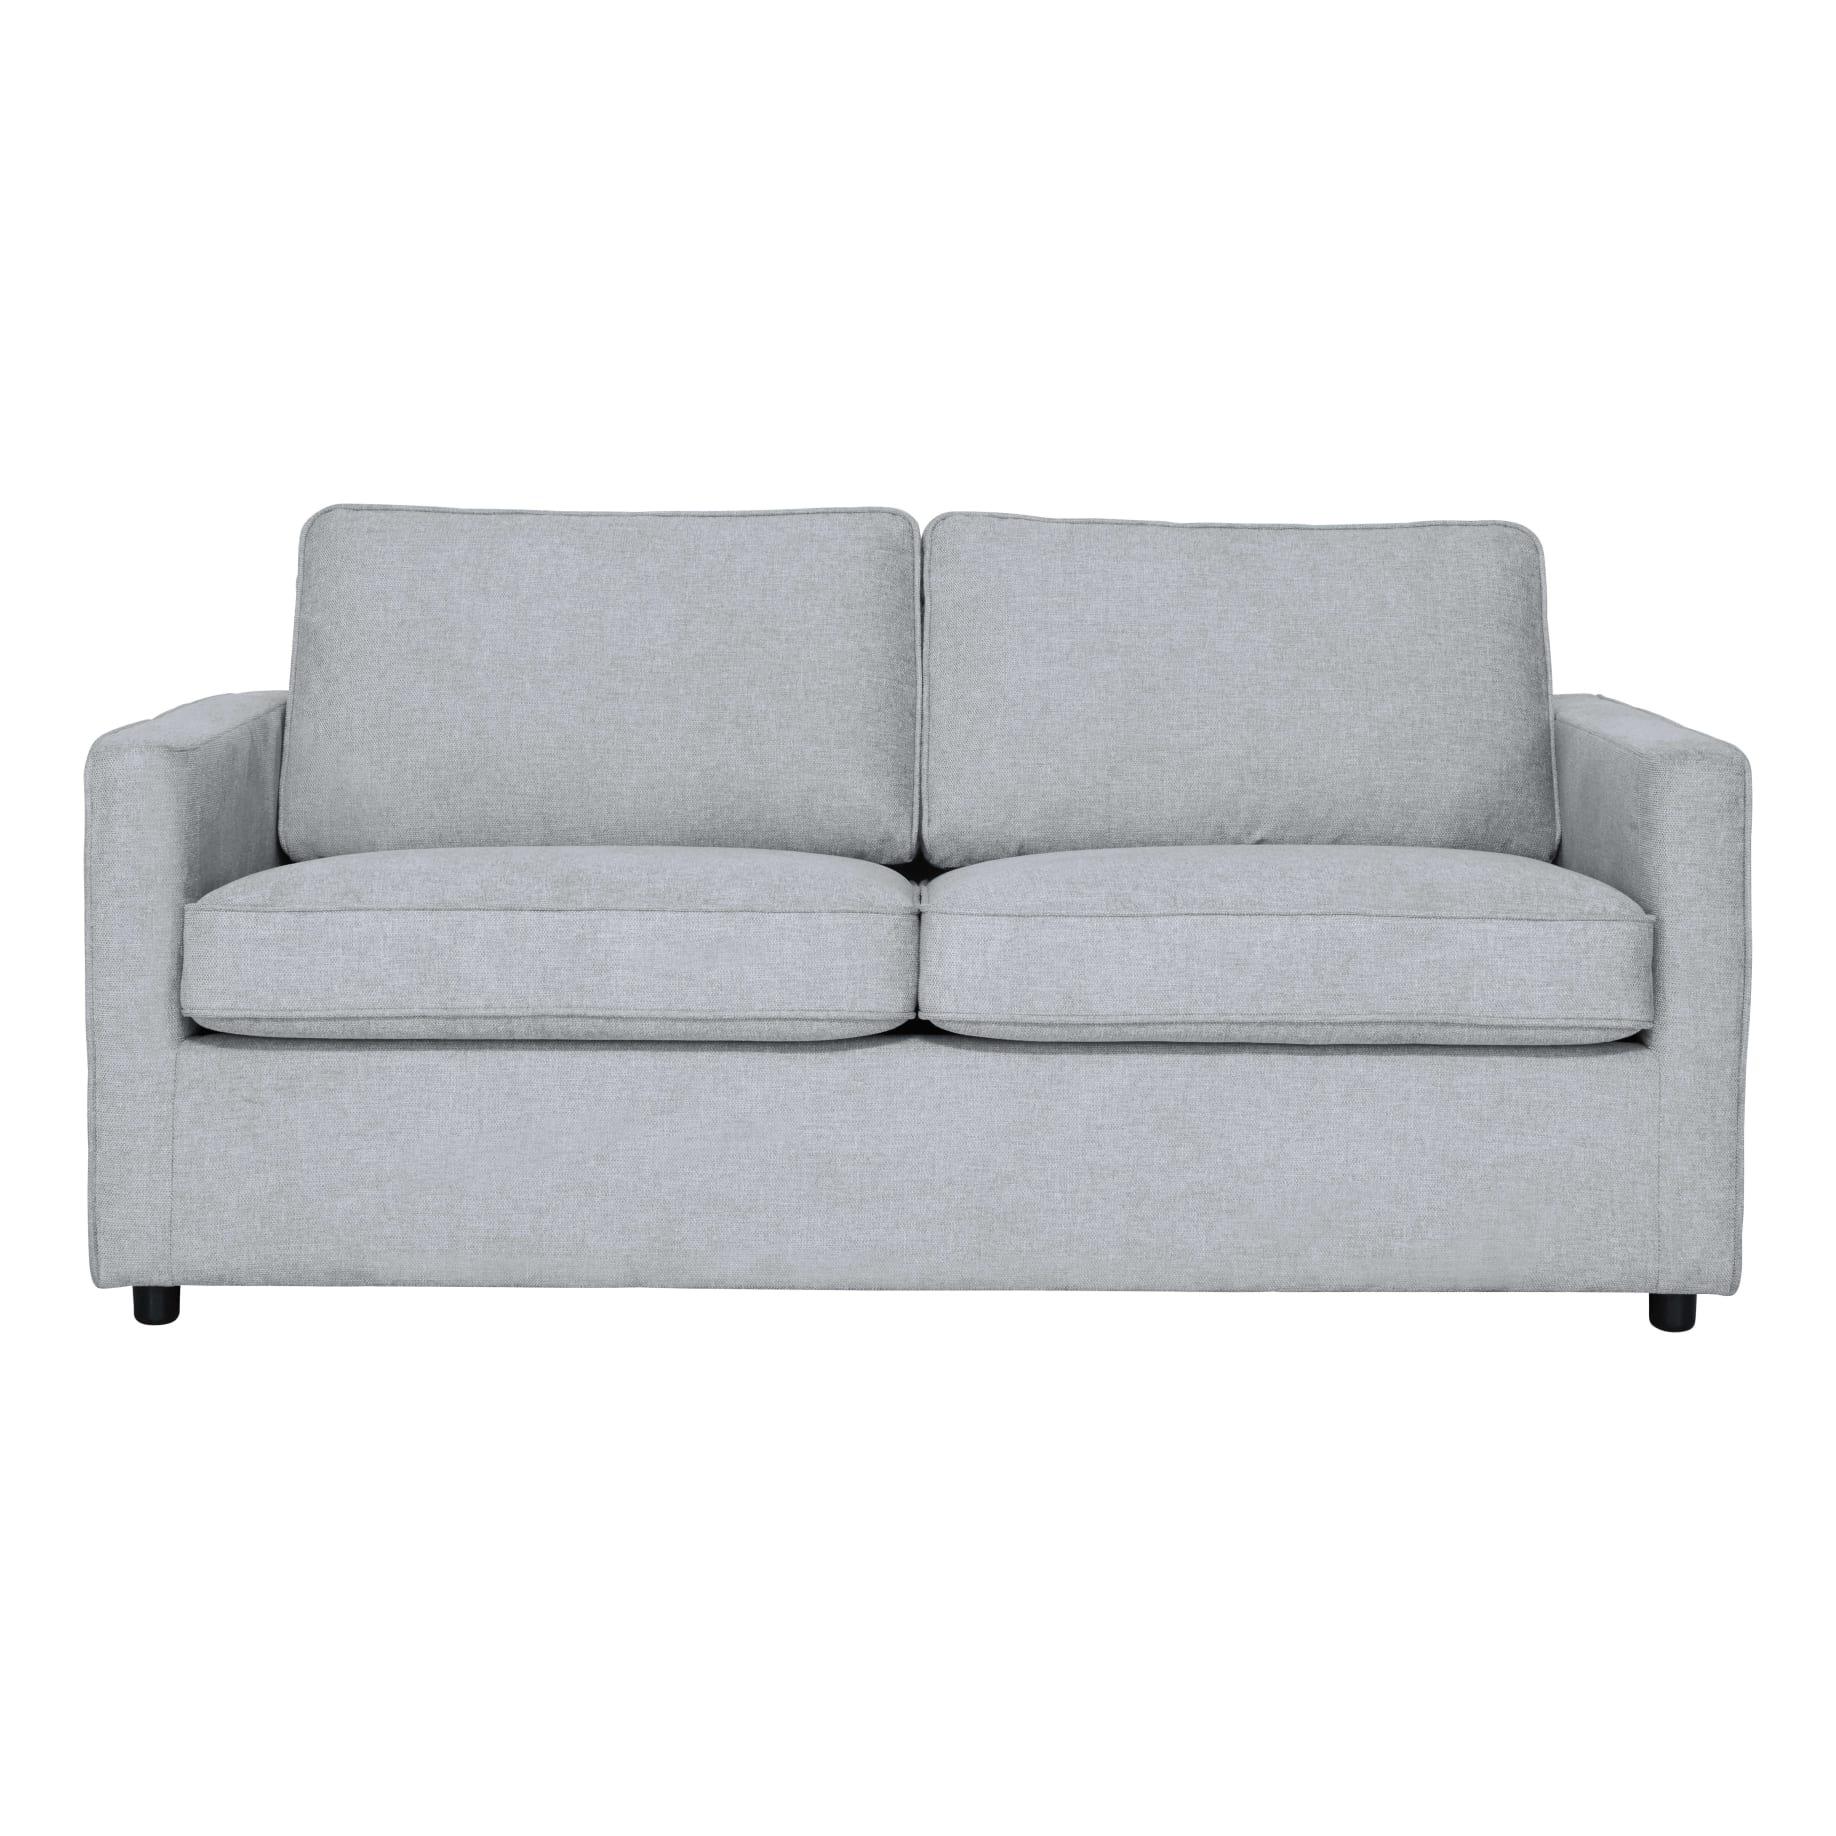 Ronin Sofabed in Belfast Light Grey